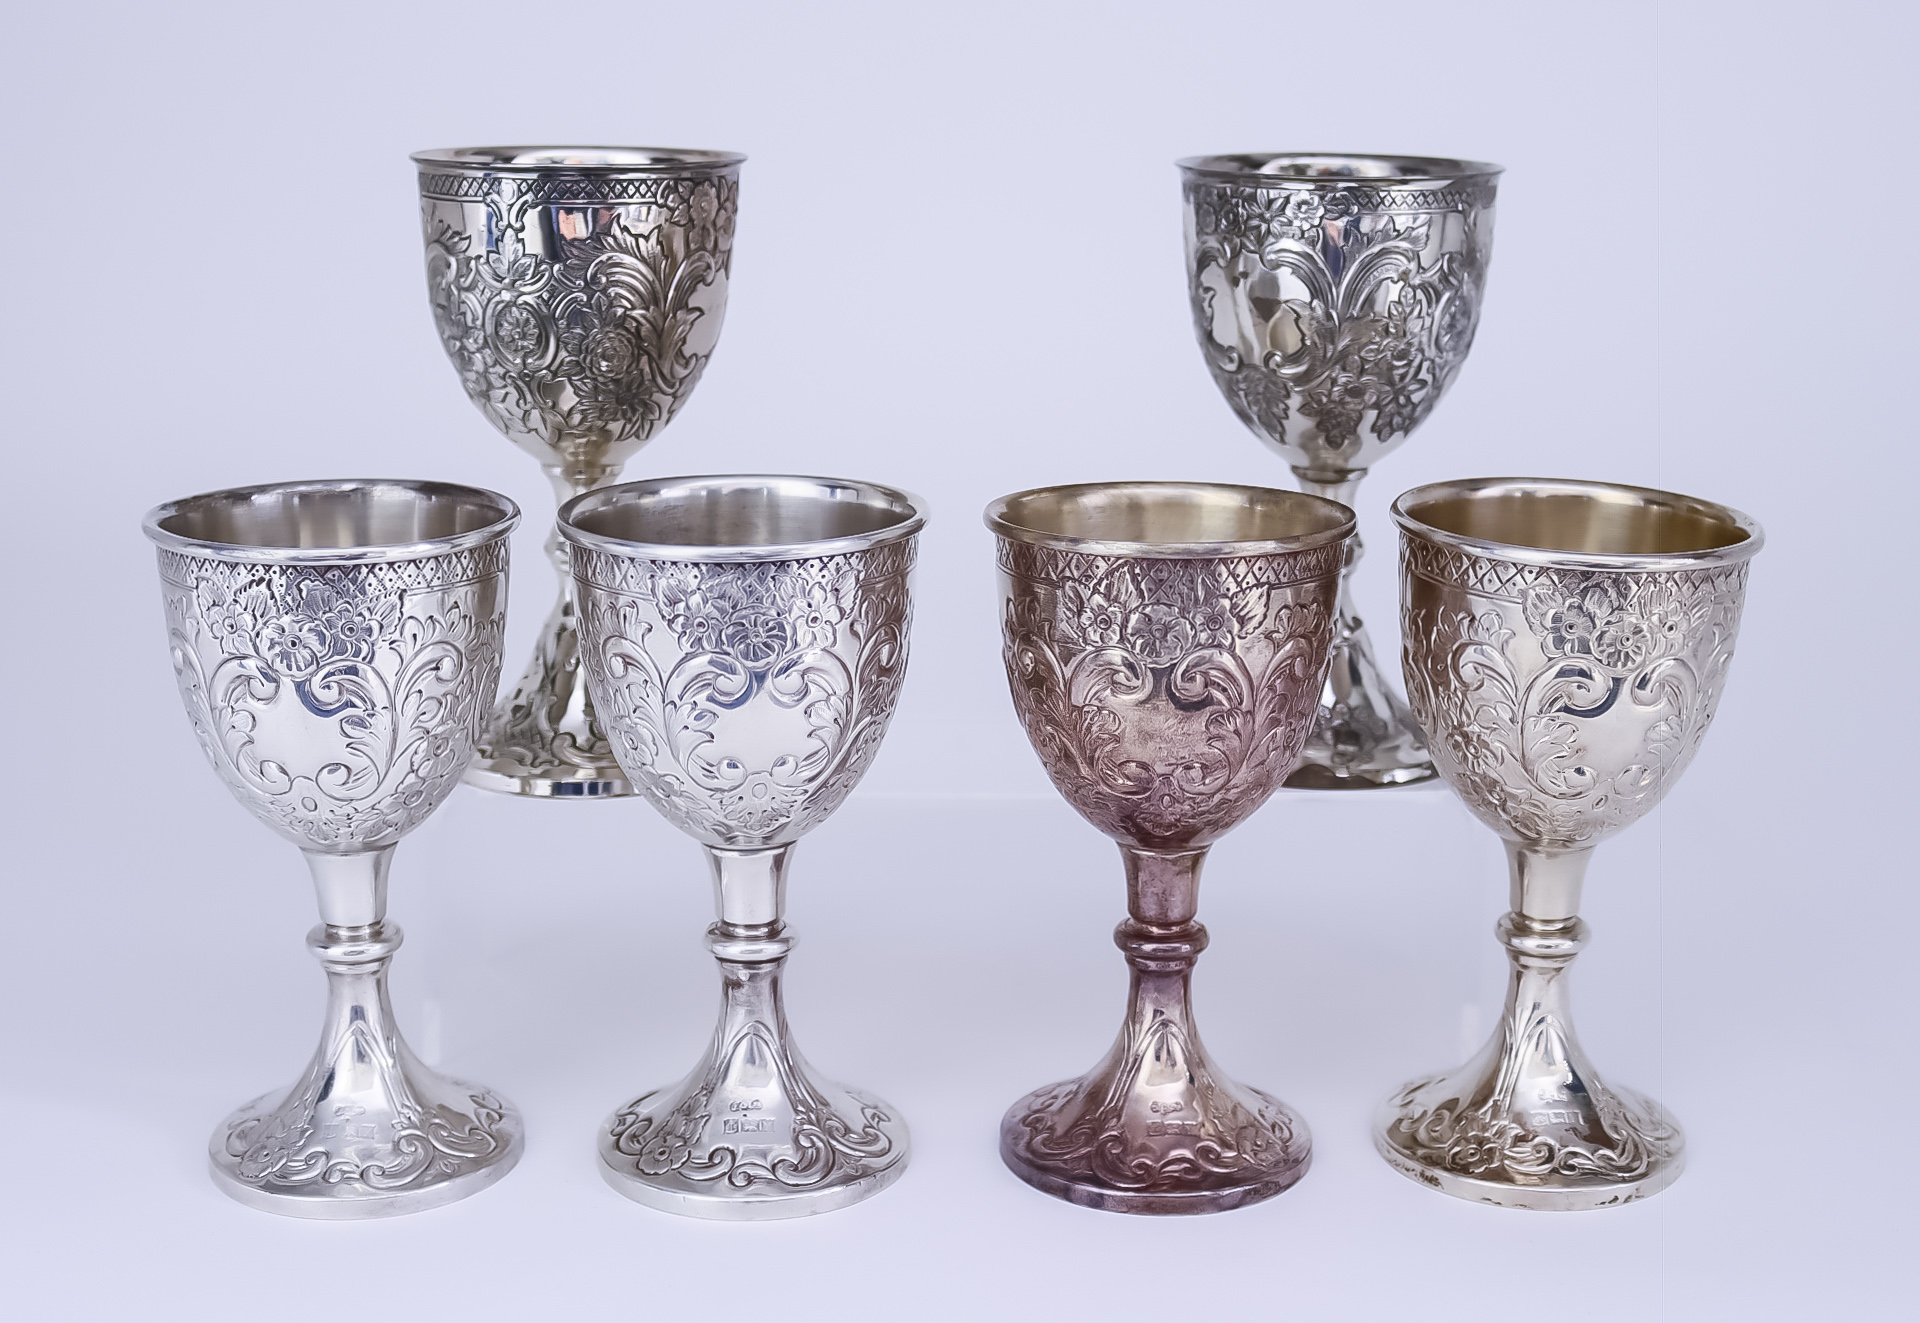 Four Elizabeth II Cast Silver Goblets and Two Similar Plated Goblets, the silver goblets by Joseph